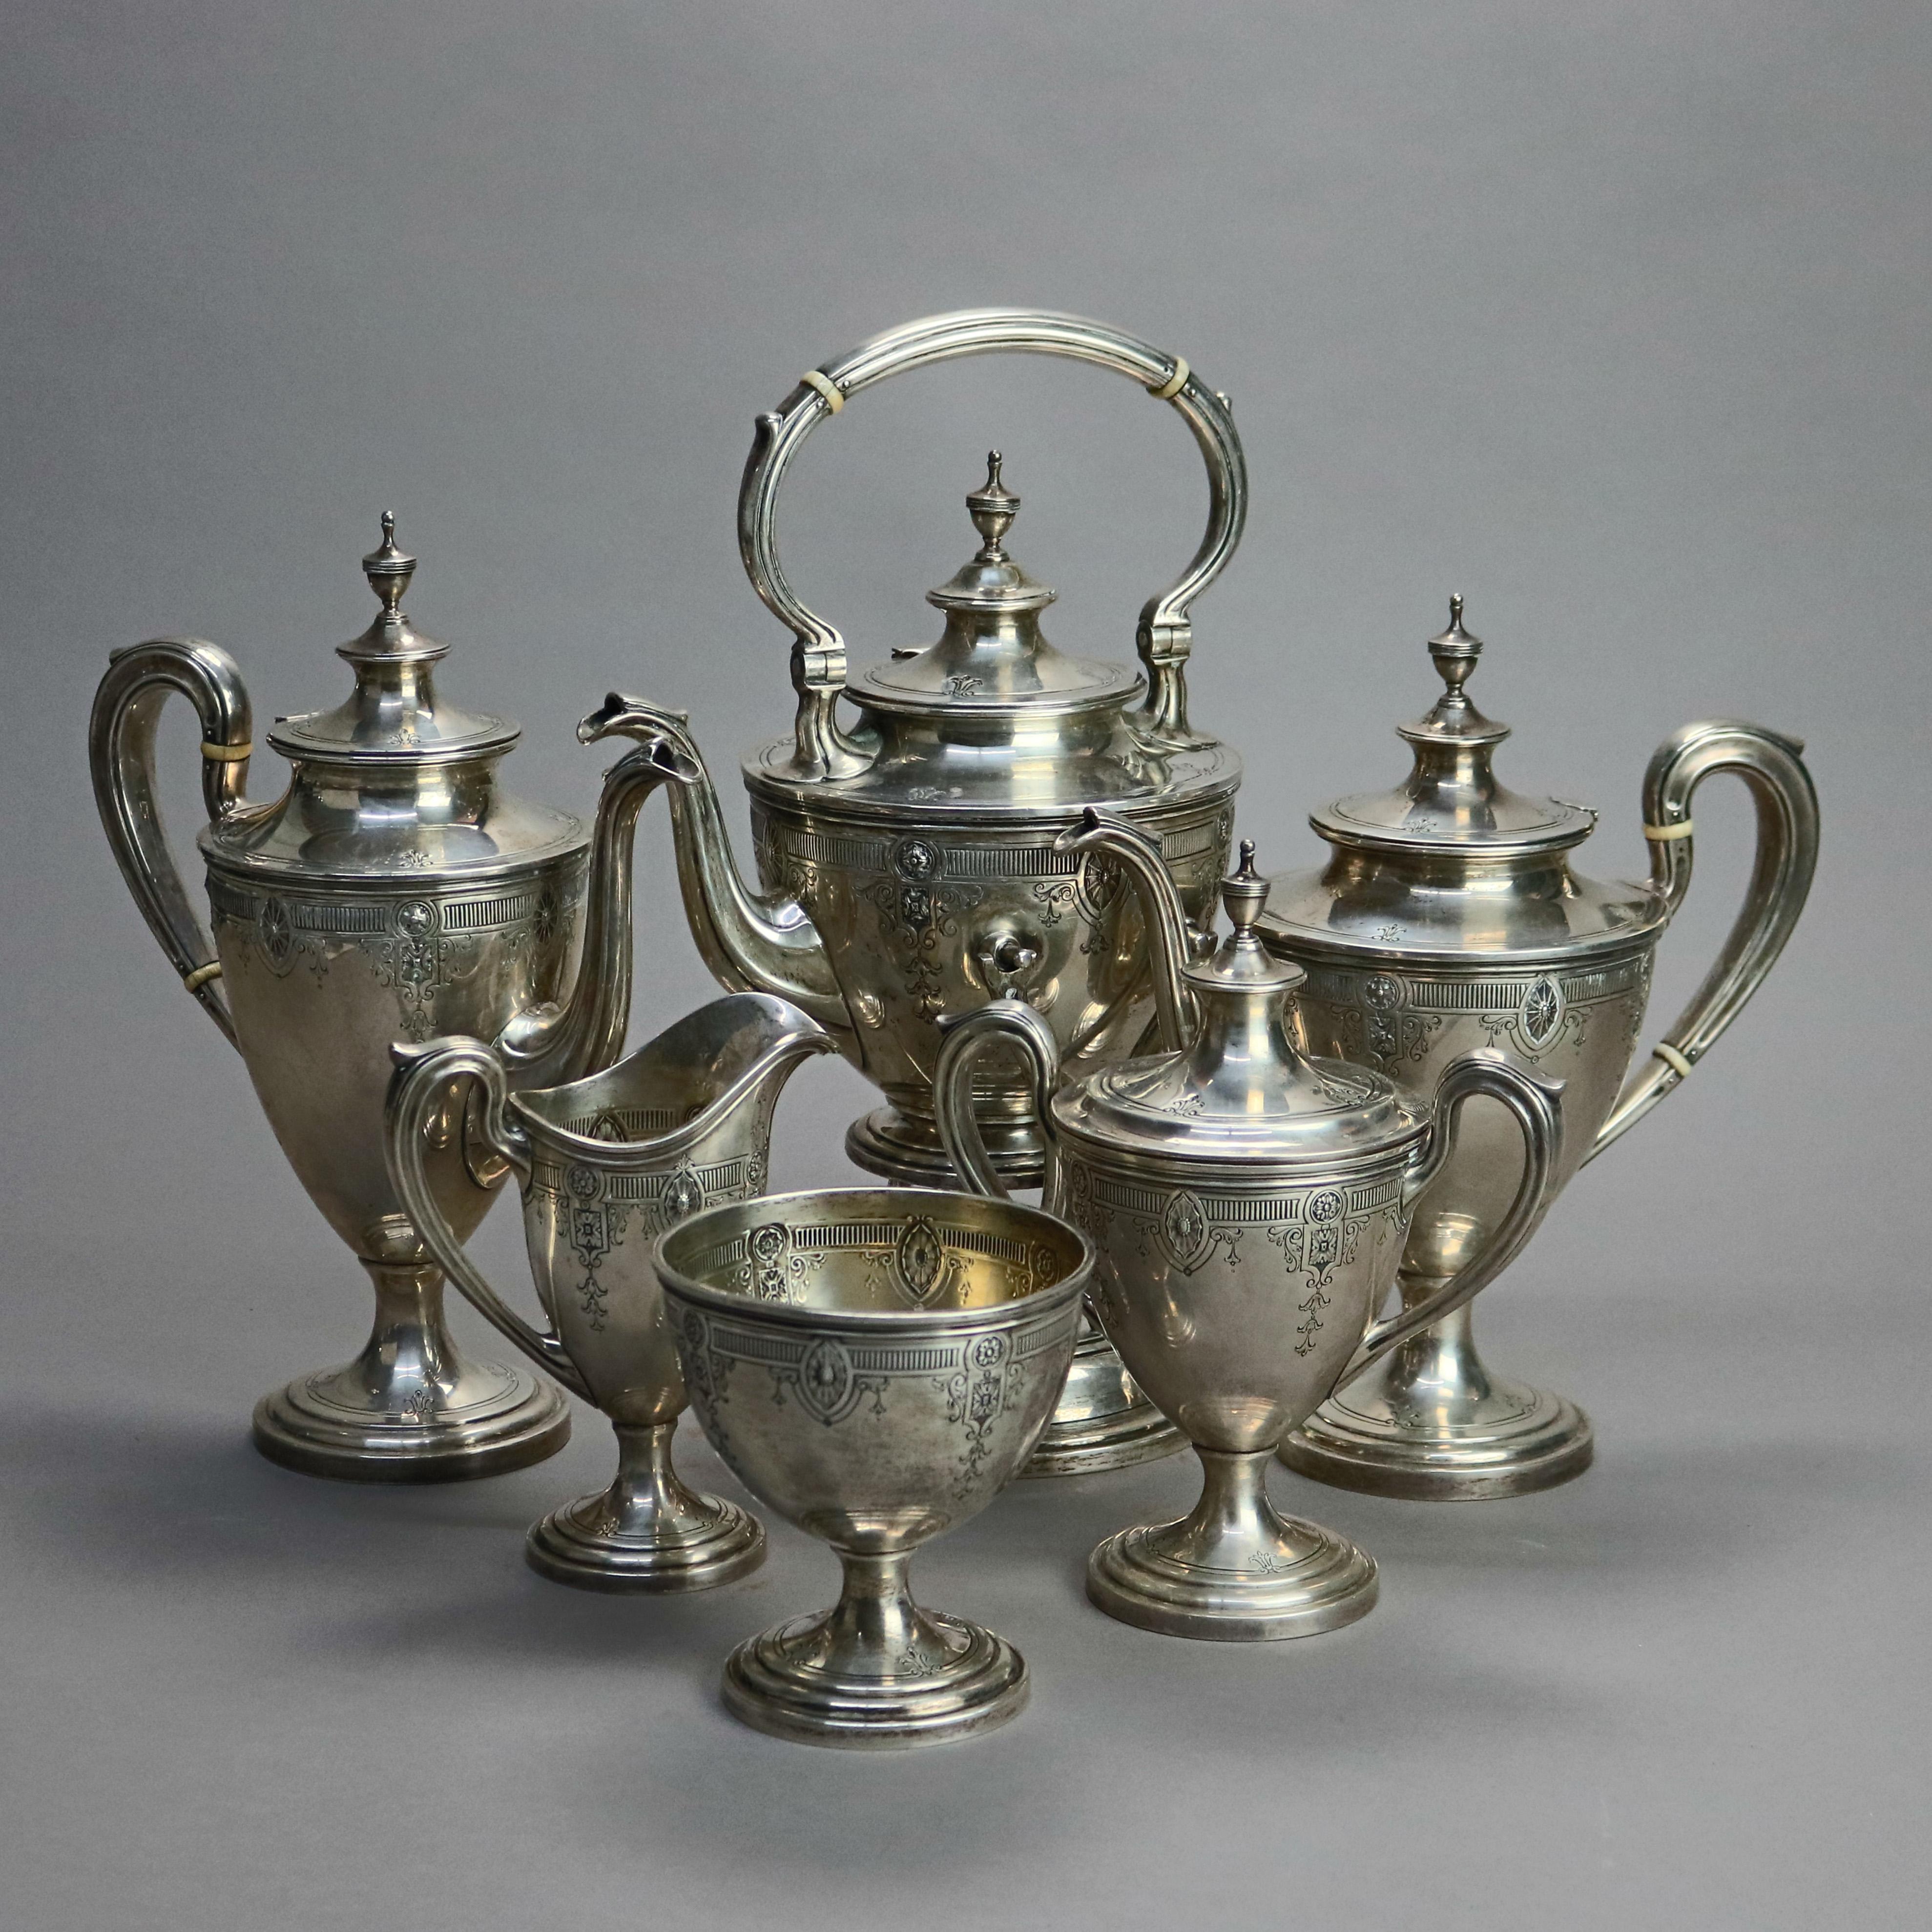 An antique tea set by Dominick & Haff offers sterling silver construction with engraved foliate, patera and reed elements and includes six pieces as outlined below, maker mark as photographed, 134.1 toz, early 20th century

Measures: Water pot on